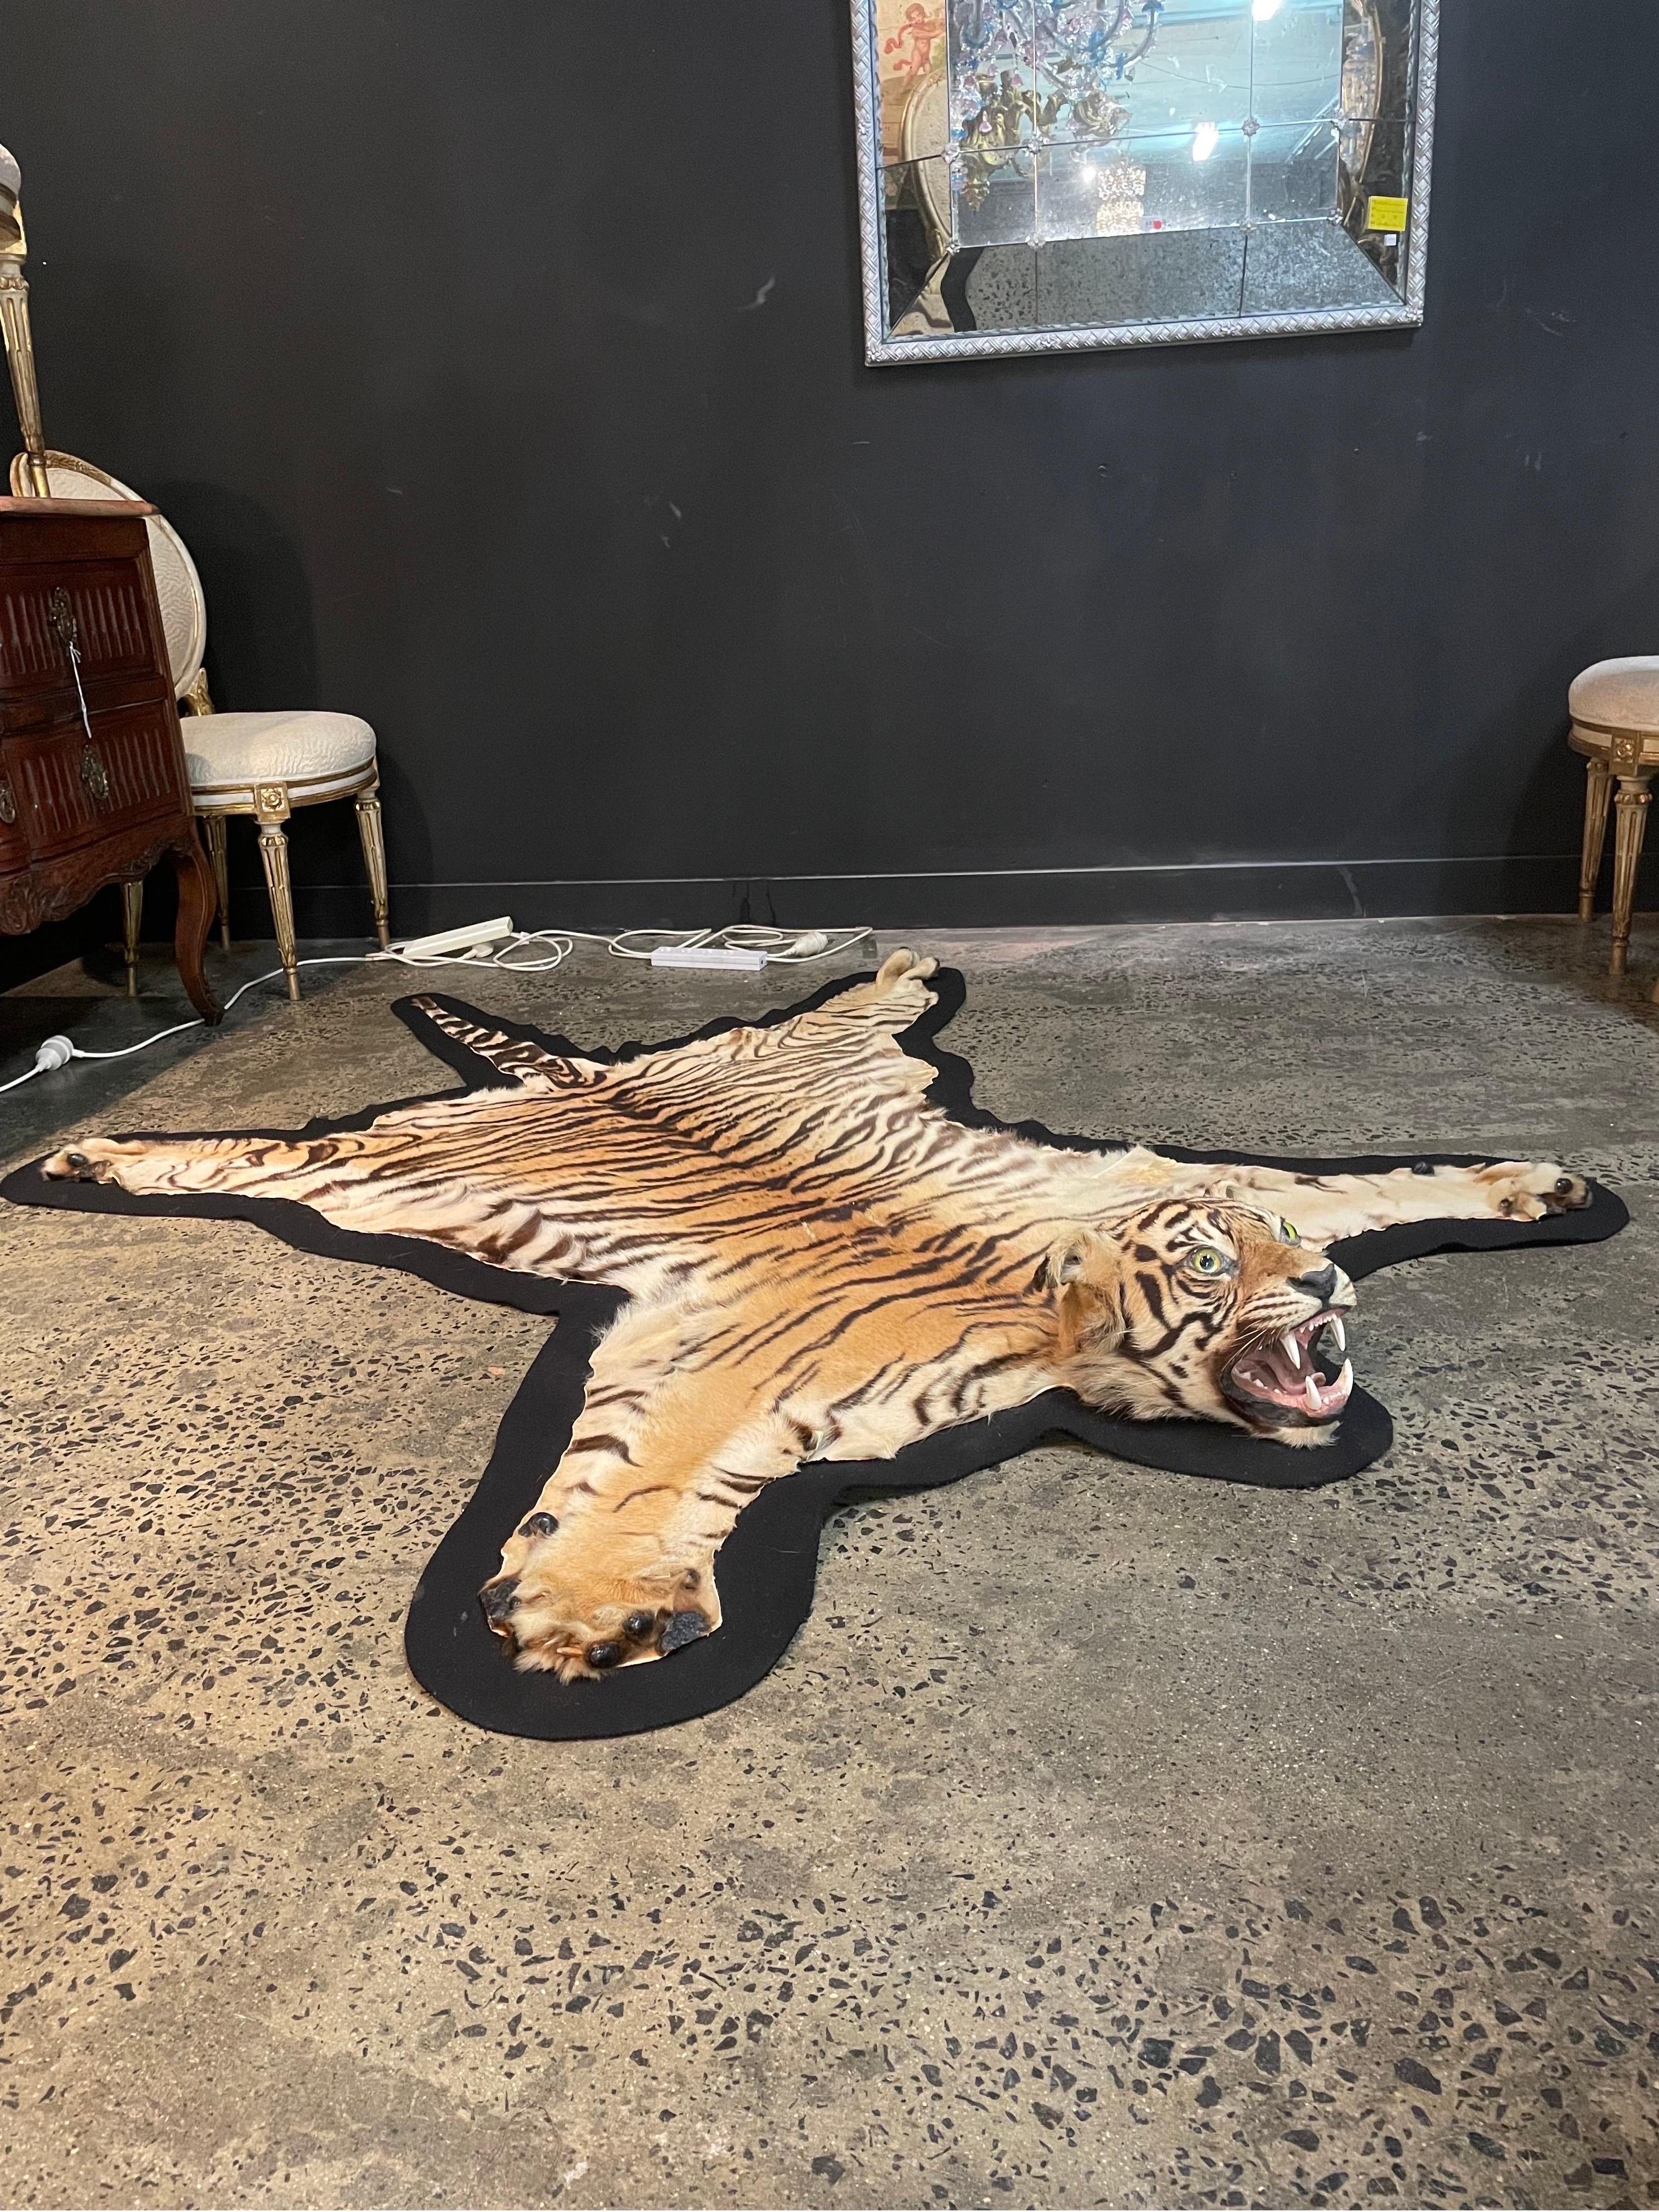 A Taxidermied Tiger Skin Rug, 1960s

Mounted on black felt, with glass eyes.

Dimension: Length: 215 cm Width: 165 cm Height: 19 cm.

Provenance: Private Australian Collector Acquired in 1960s.

Notes: This piece is sold with an accompanying letter